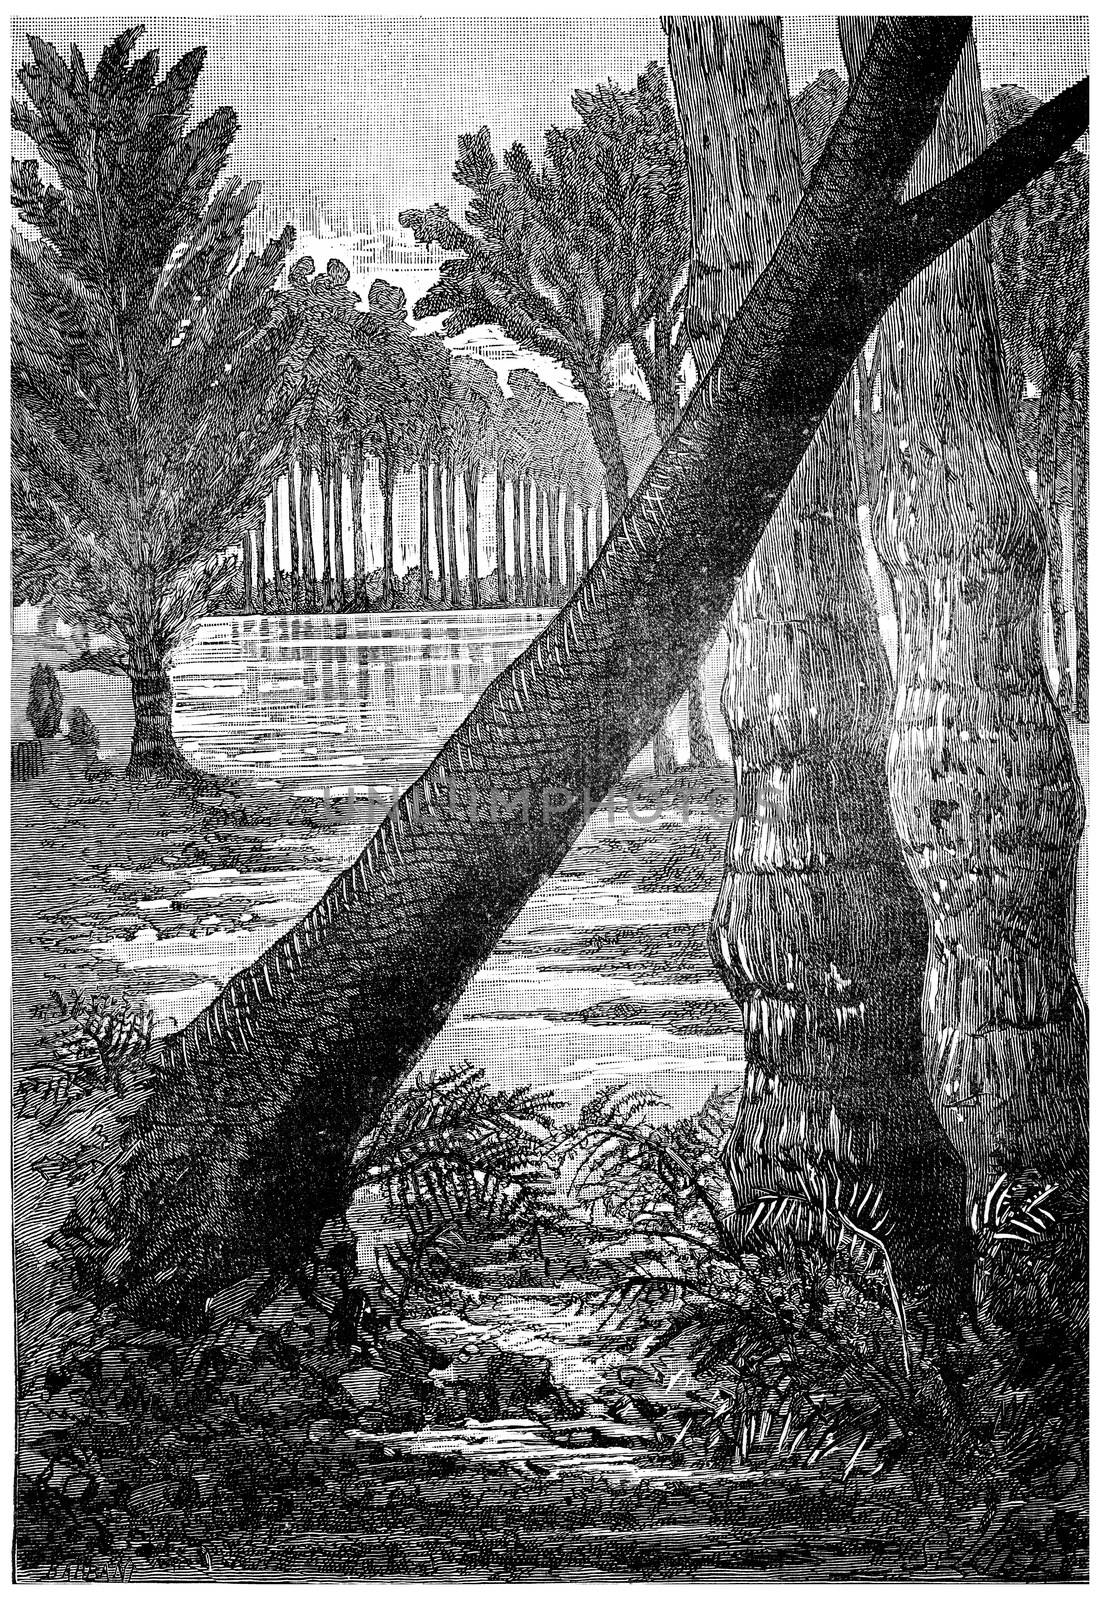 The giant trees of the Carboniferous period. Sigillaires, lepidodendrons ferns, vintage engraved illustration. Earth before man – 1886.